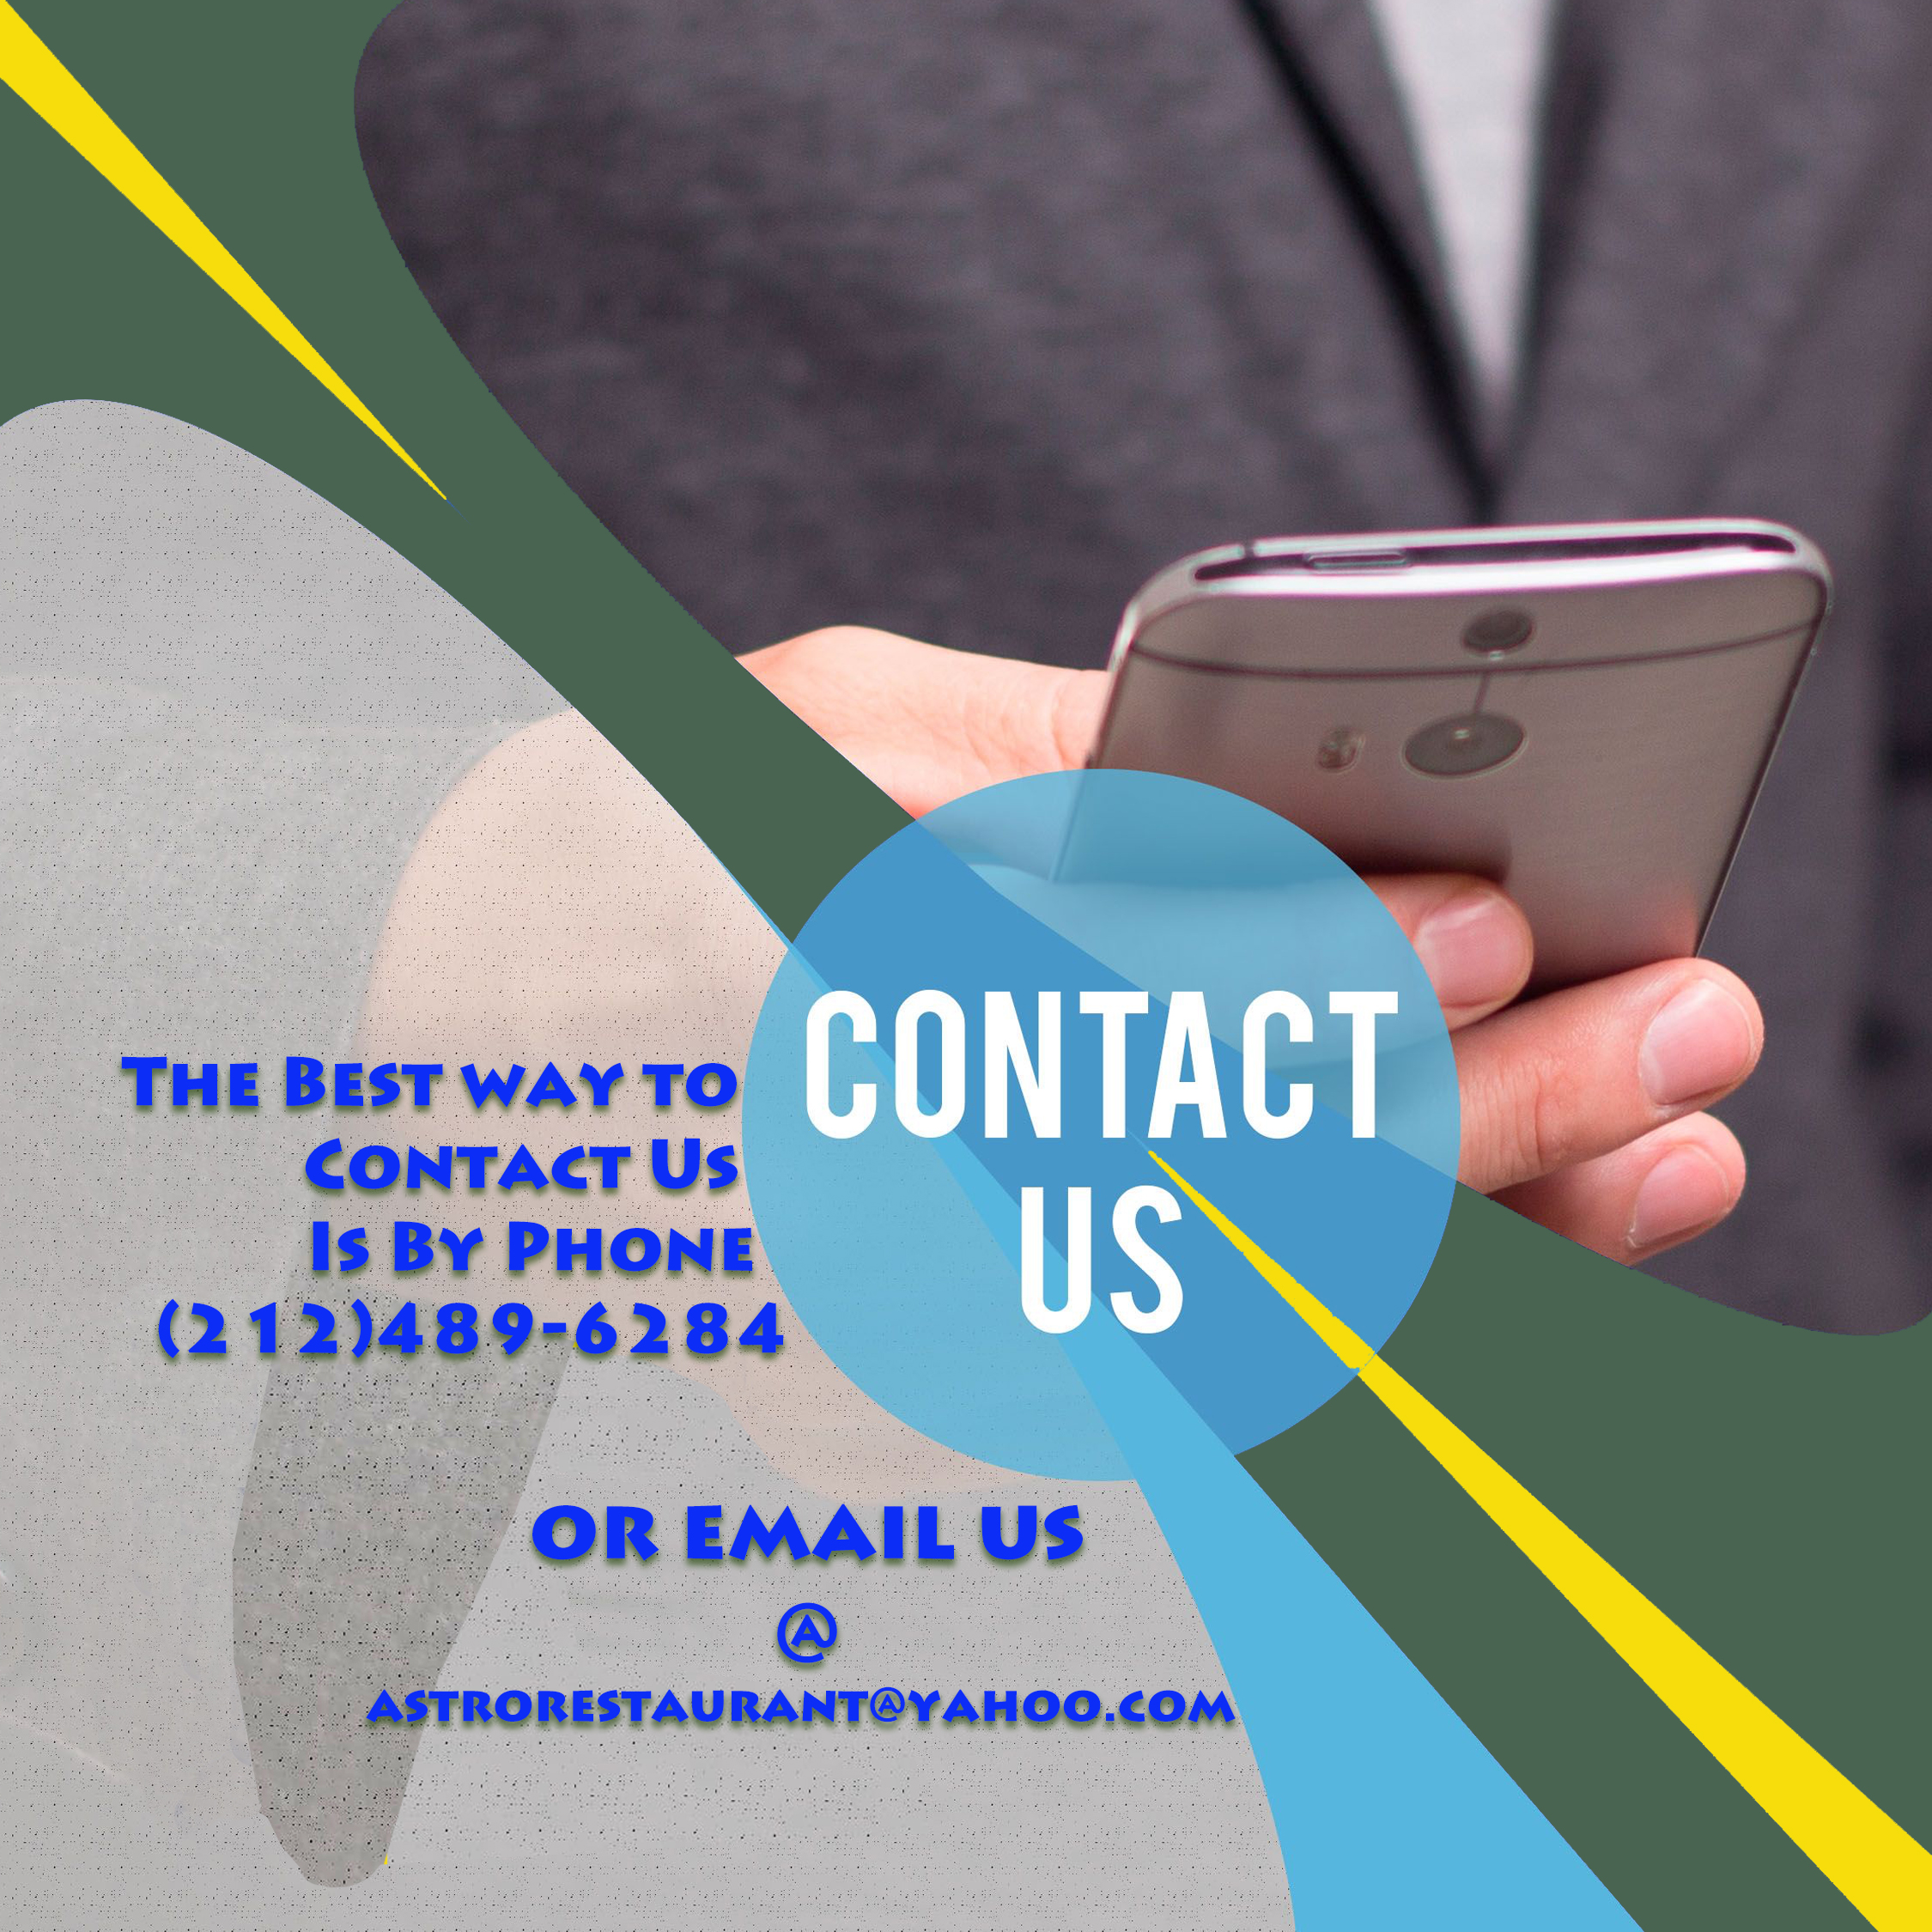 The Best Way to Contact us if by phone at (212) 489-6284 or email us at astrorestaurant@yahoo.com